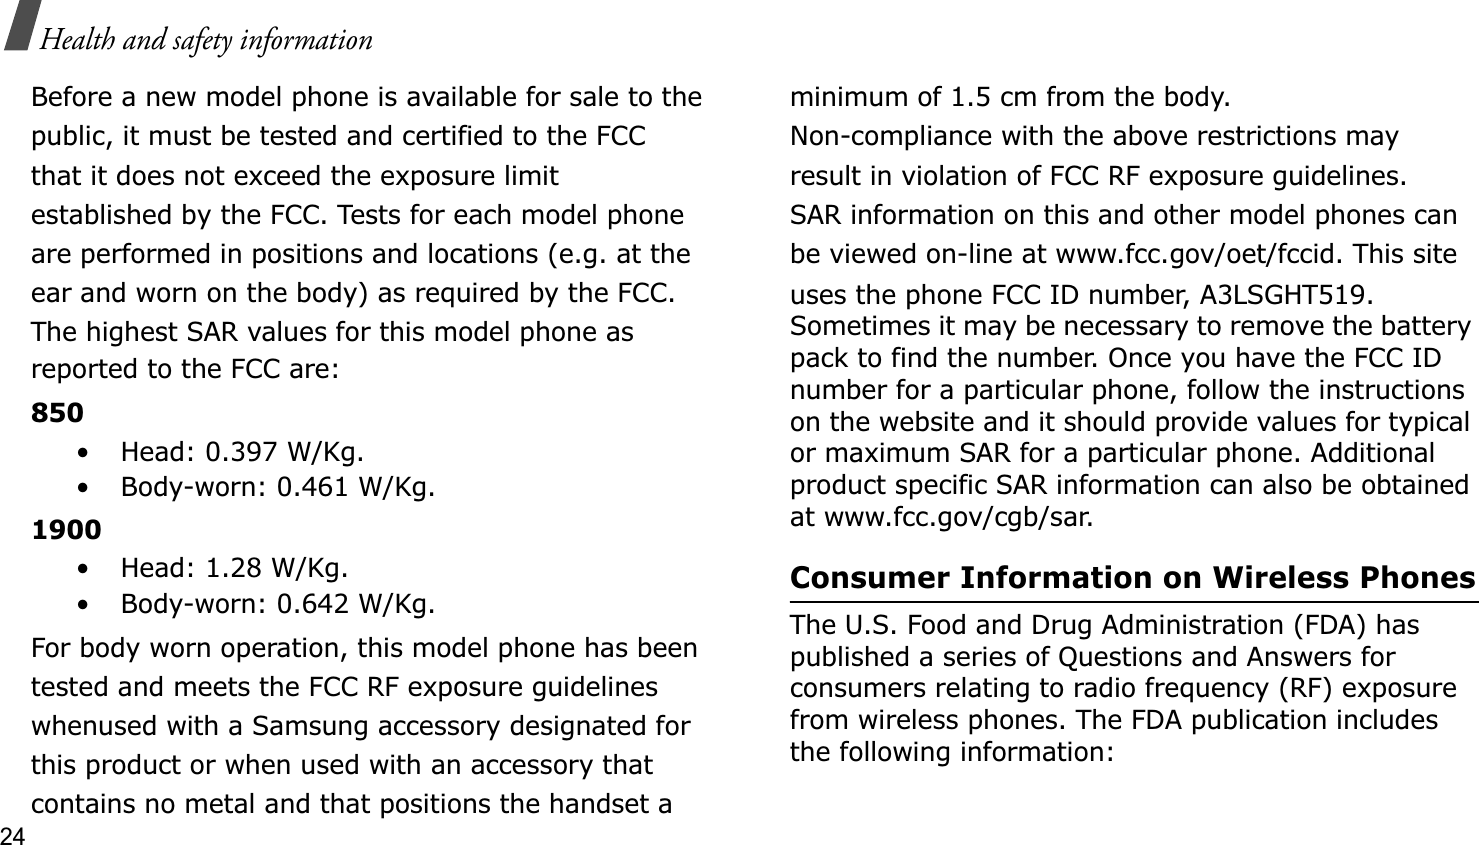 24Health and safety informationBefore a new model phone is available for sale to thepublic, it must be tested and certified to the FCCthat it does not exceed the exposure limitestablished by the FCC. Tests for each model phoneare performed in positions and locations (e.g. at theear and worn on the body) as required by the FCC.The highest SAR values for this model phone asreported to the FCC are:850• Head: 0.397 W/Kg.• Body-worn: 0.461 W/Kg.1900• Head: 1.28 W/Kg.• Body-worn: 0.642 W/Kg.For body worn operation, this model phone has beentested and meets the FCC RF exposure guidelineswhenused with a Samsung accessory designated forthis product or when used with an accessory thatcontains no metal and that positions the handset aminimum of 1.5 cm from the body.Non-compliance with the above restrictions mayresult in violation of FCC RF exposure guidelines.SAR information on this and other model phones canbe viewed on-line at www.fcc.gov/oet/fccid. This siteuses the phone FCC ID number, A3LSGHT519.Sometimes it may be necessary to remove the battery pack to find the number. Once you have the FCC ID number for a particular phone, follow the instructions on the website and it should provide values for typical or maximum SAR for a particular phone. Additional product specific SAR information can also be obtained at www.fcc.gov/cgb/sar.Consumer Information on Wireless PhonesThe U.S. Food and Drug Administration (FDA) has published a series of Questions and Answers for consumers relating to radio frequency (RF) exposure from wireless phones. The FDA publication includes the following information: